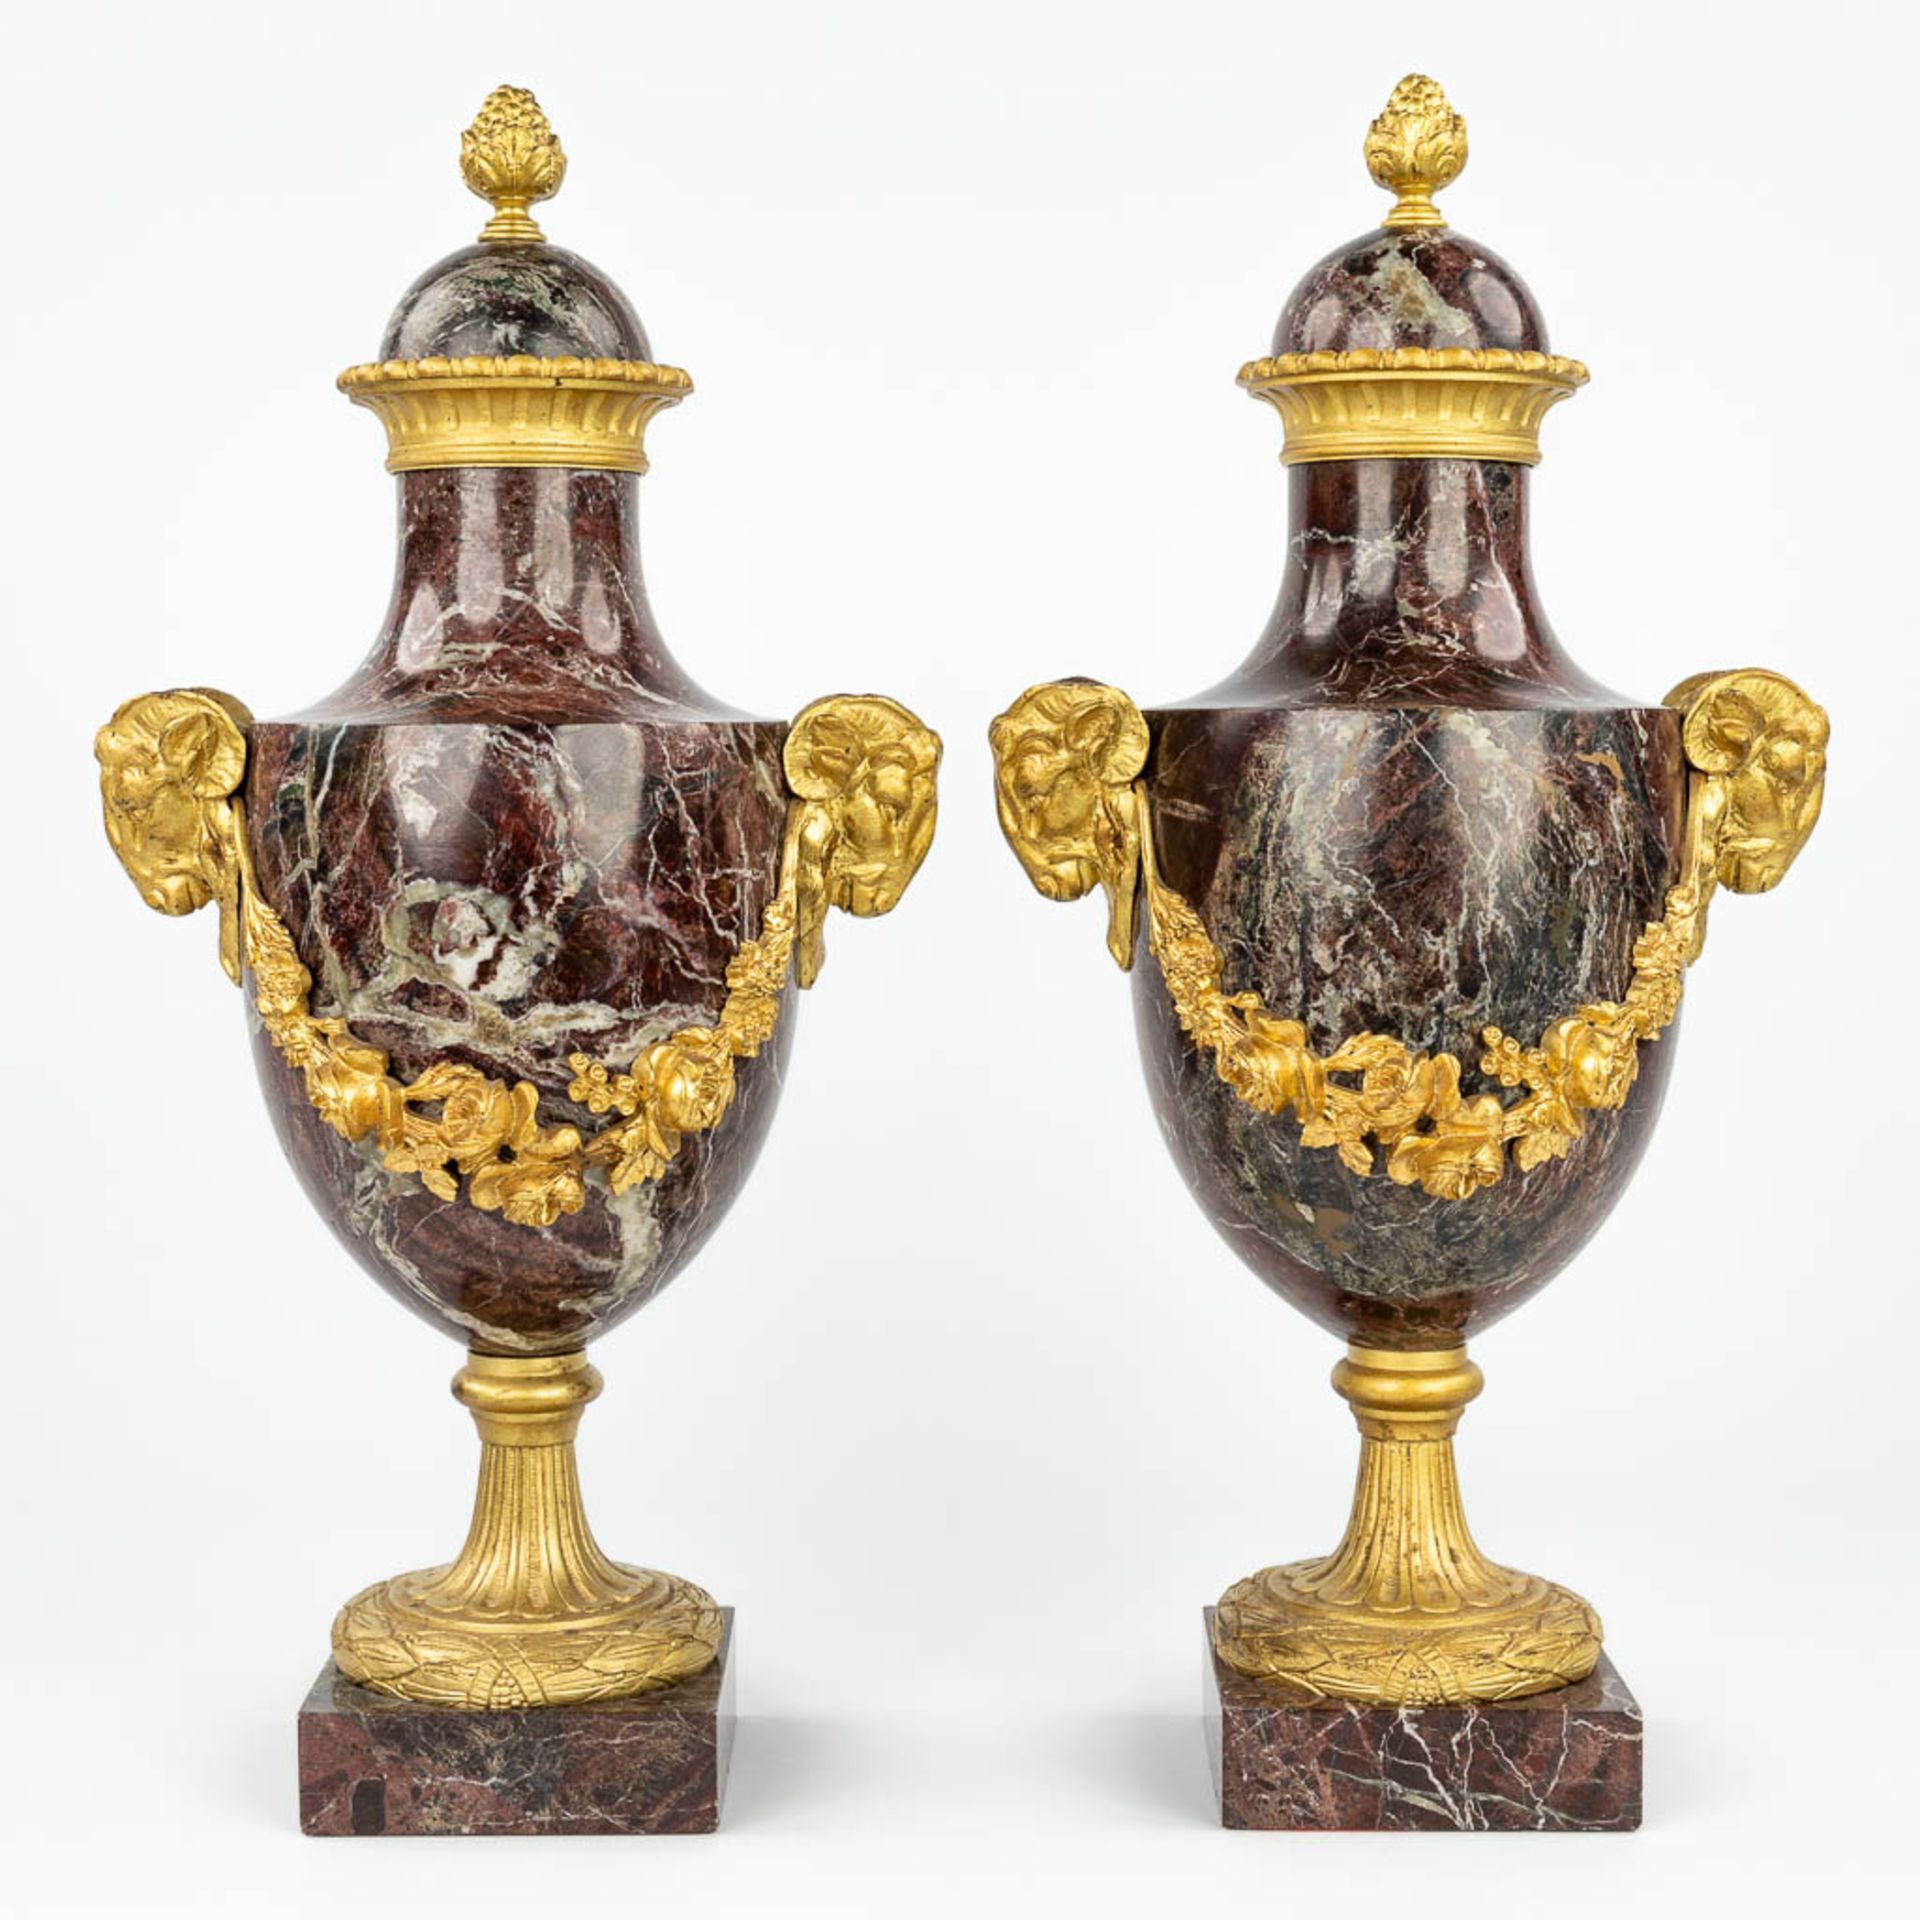 A pair of red marble cassolettes mounted with gilt bronze ram heads in Louis XVI style. 19th C. (L: